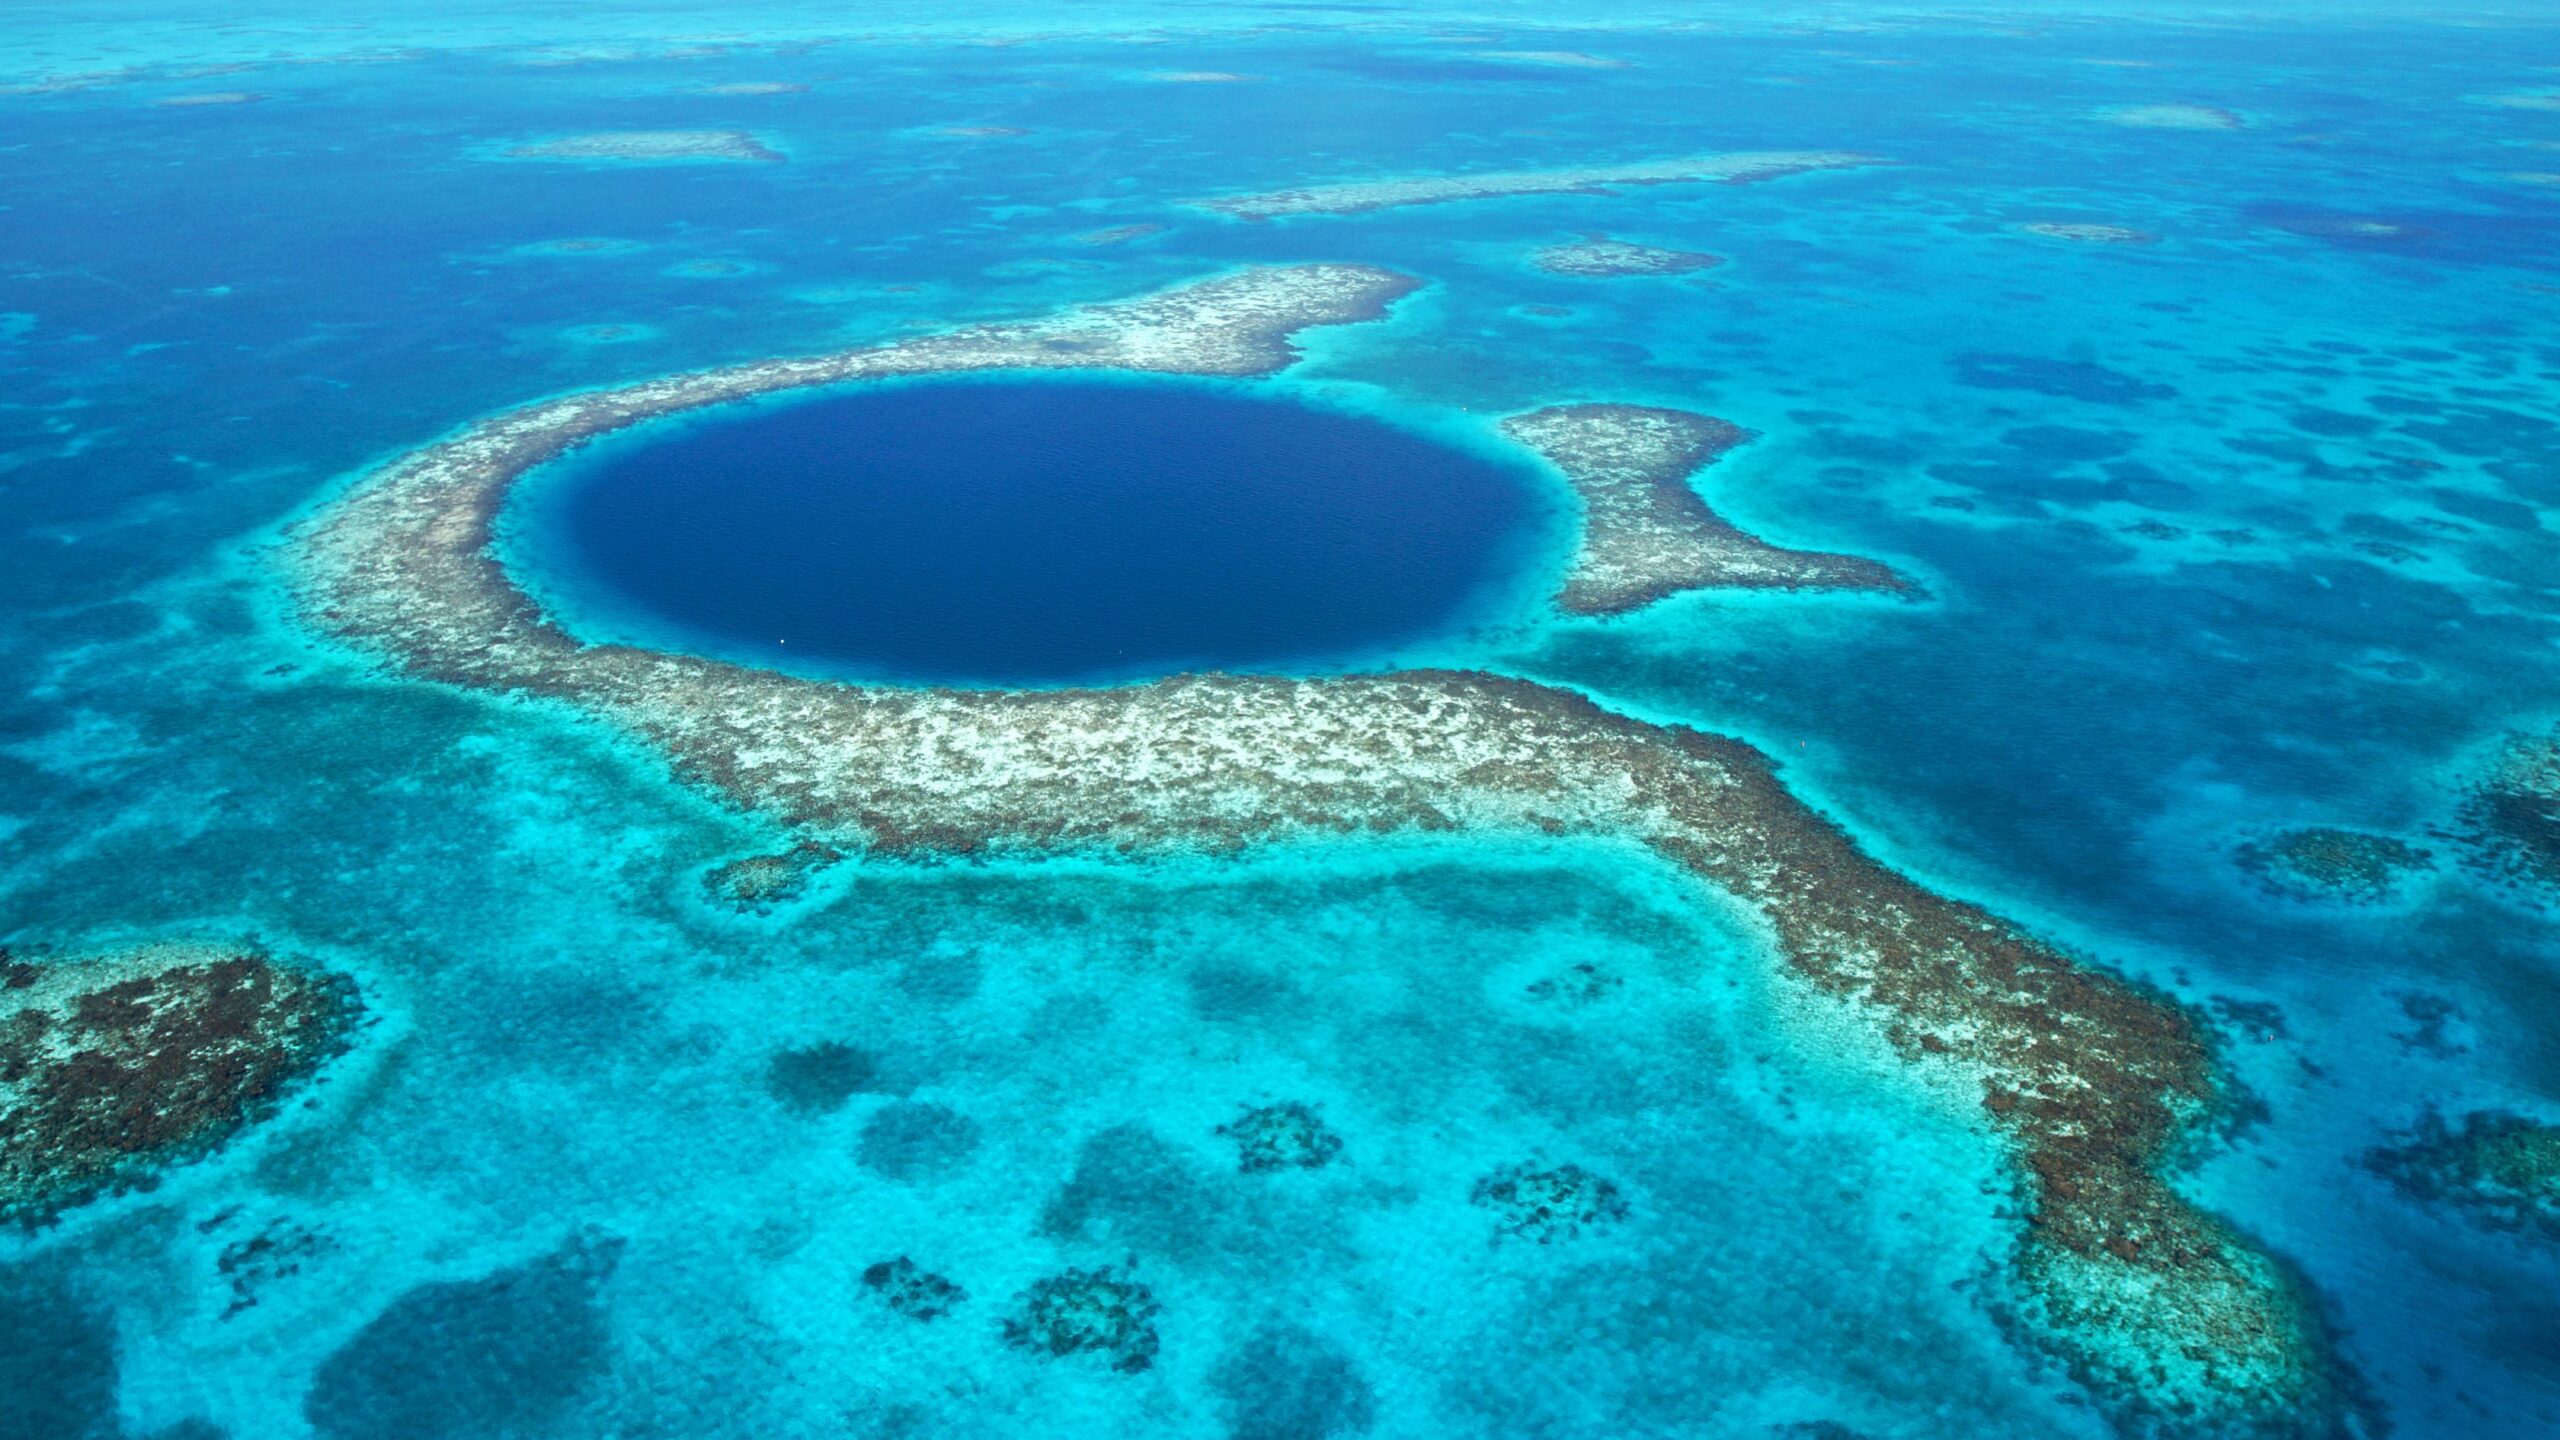 Great Blue Hole on LIghthouse reef